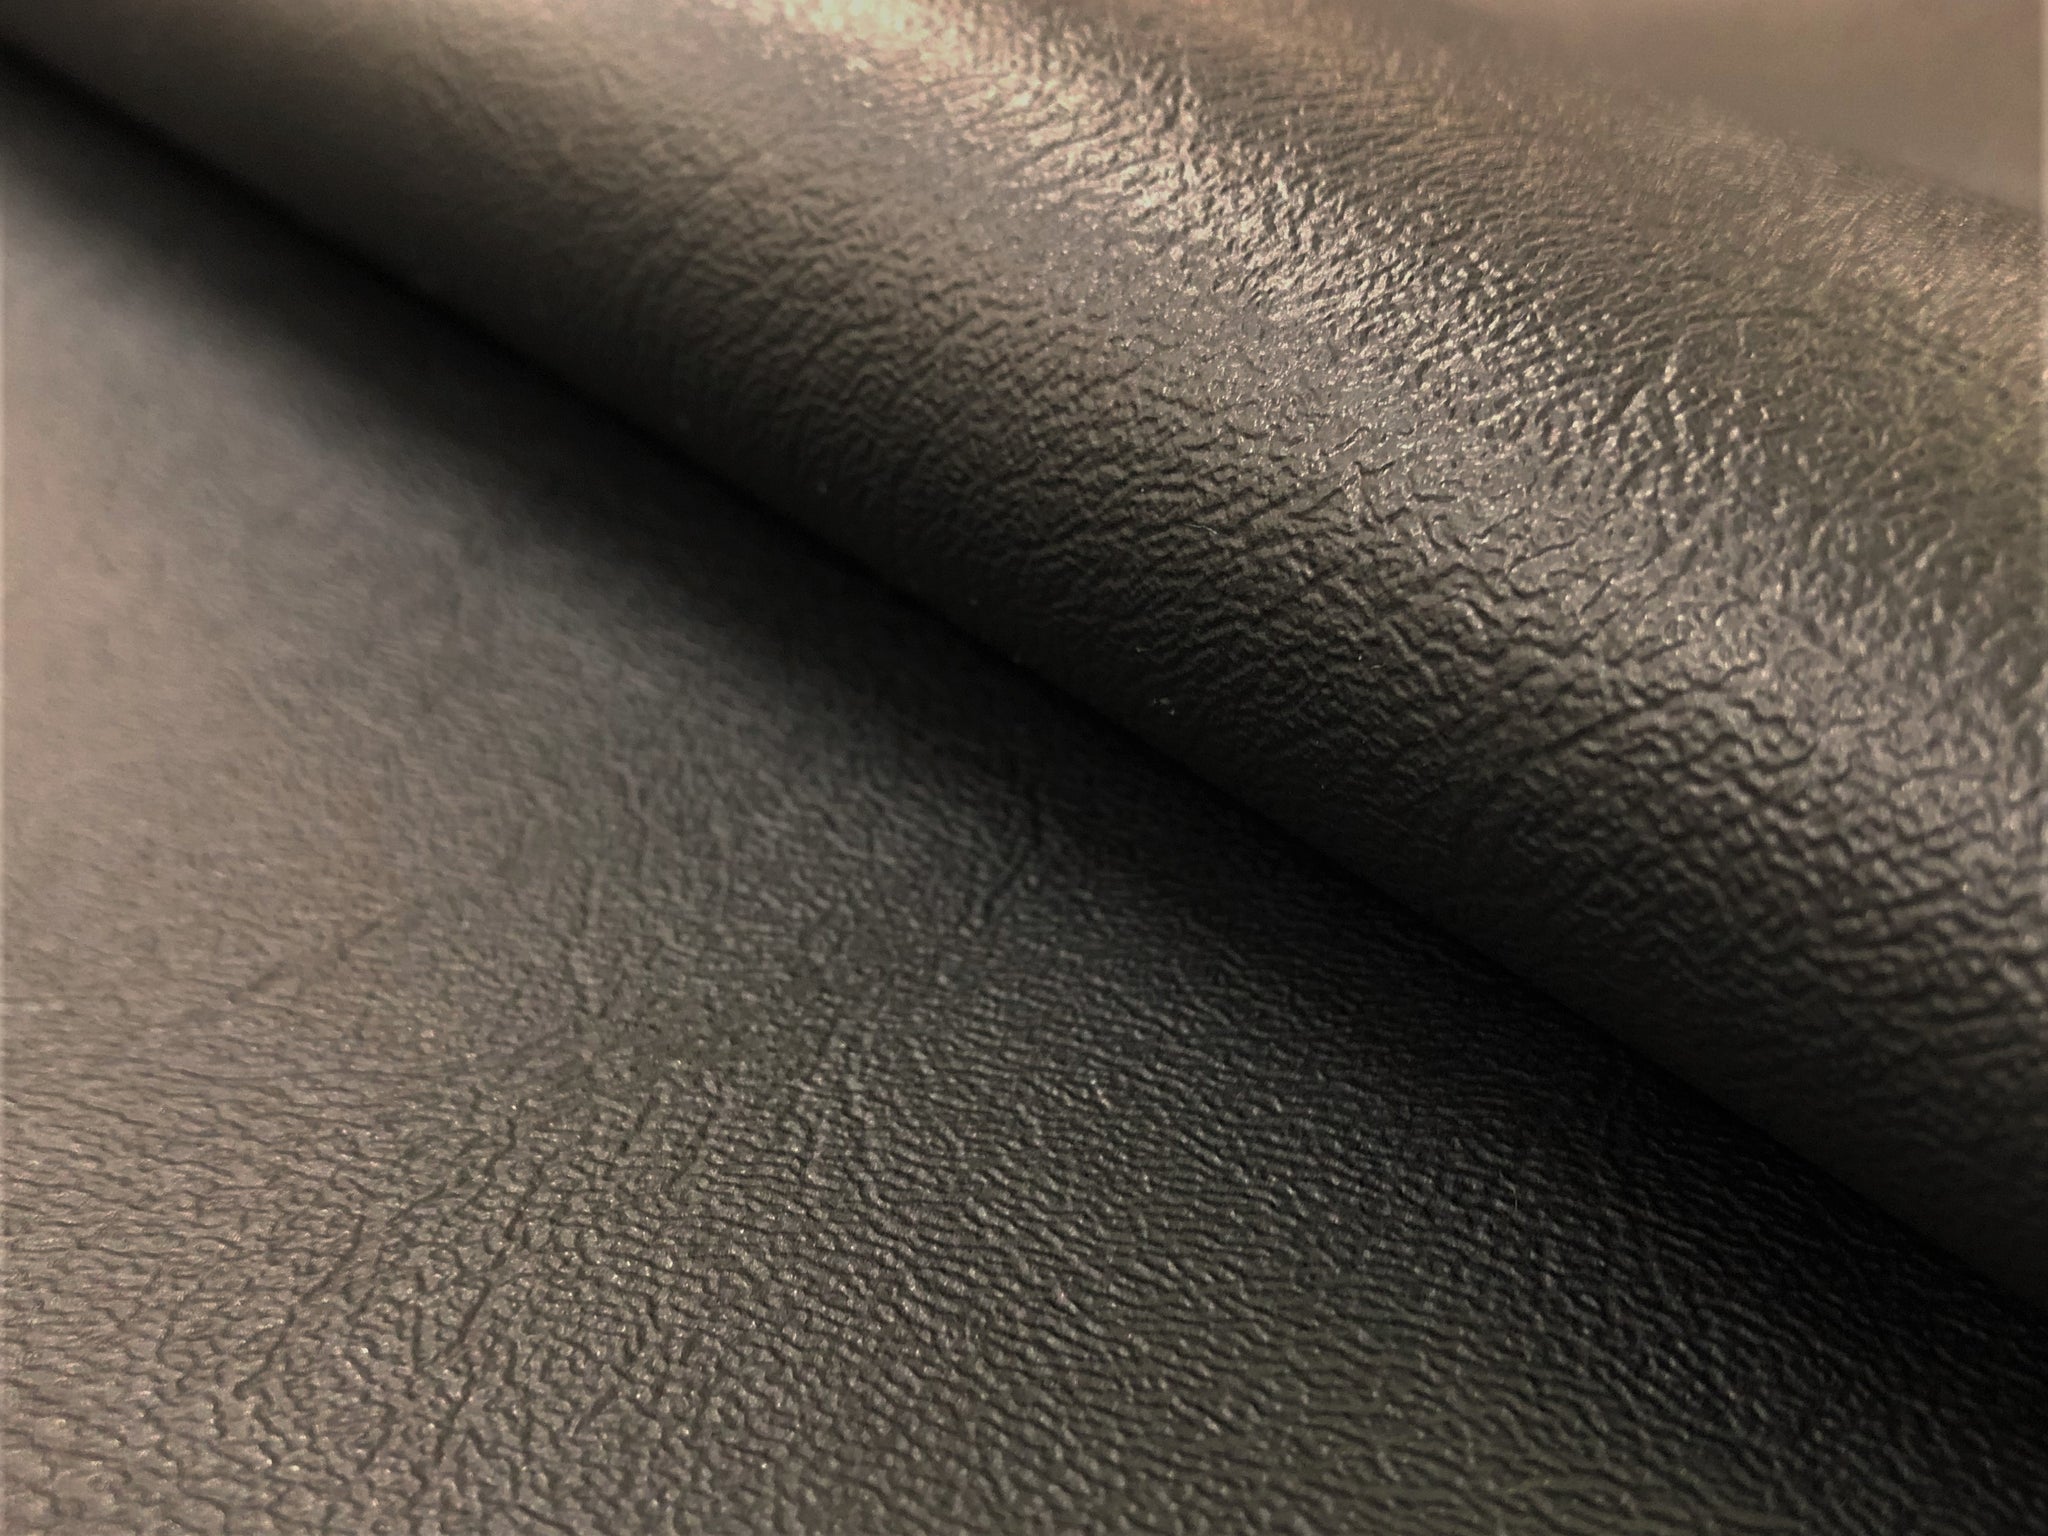 Silver, Metallic Leather Grain Upholstery Faux Leather By The Yard